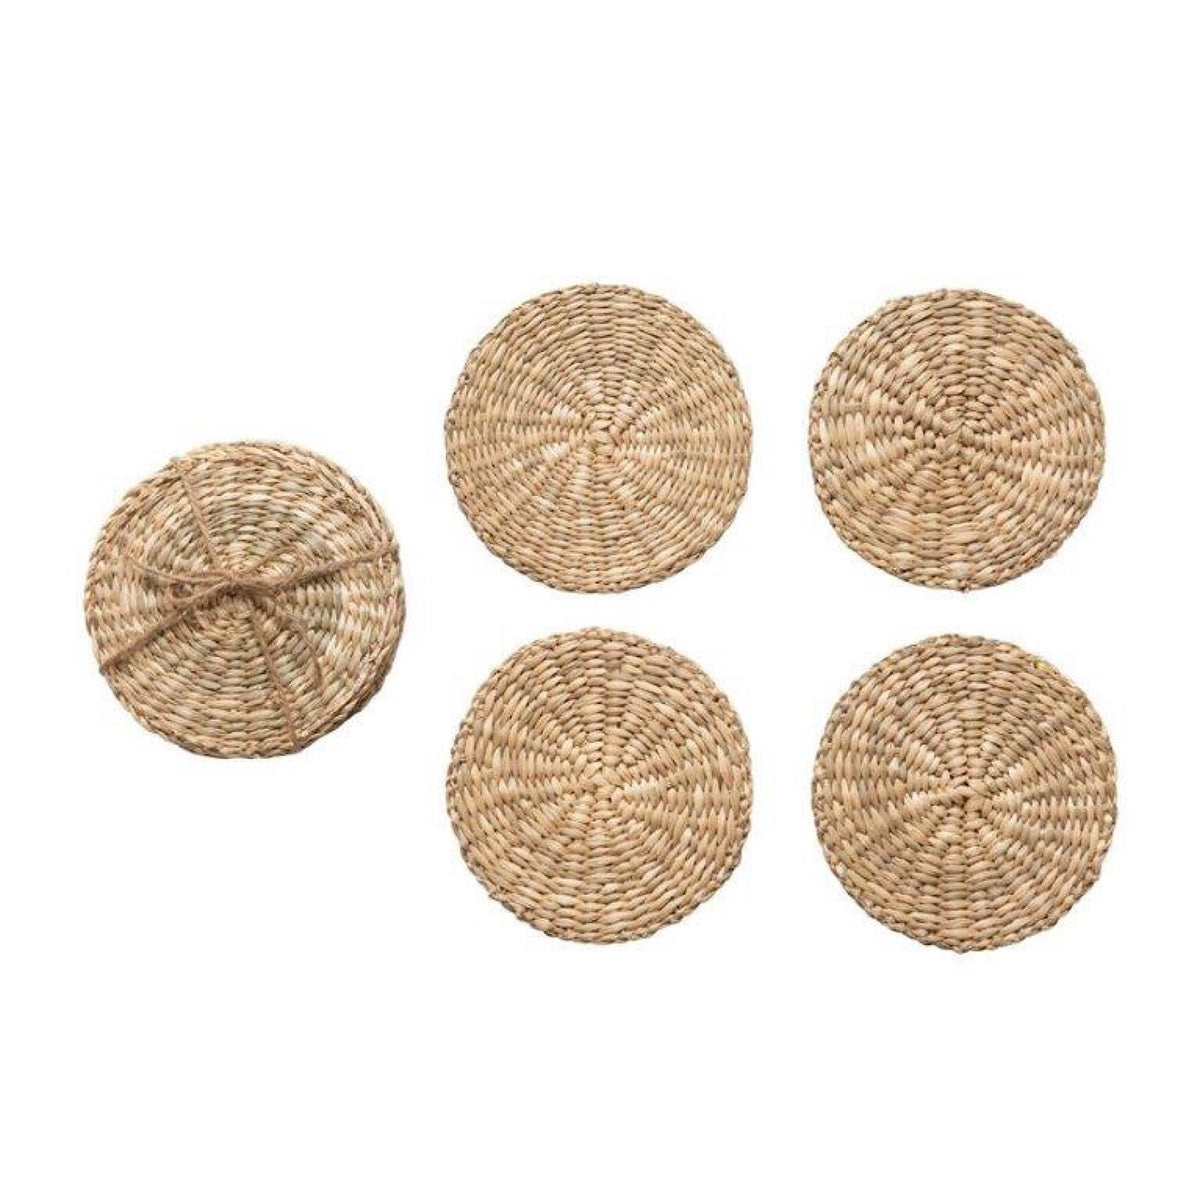 Round Seagrass Coasters with Jute Tie